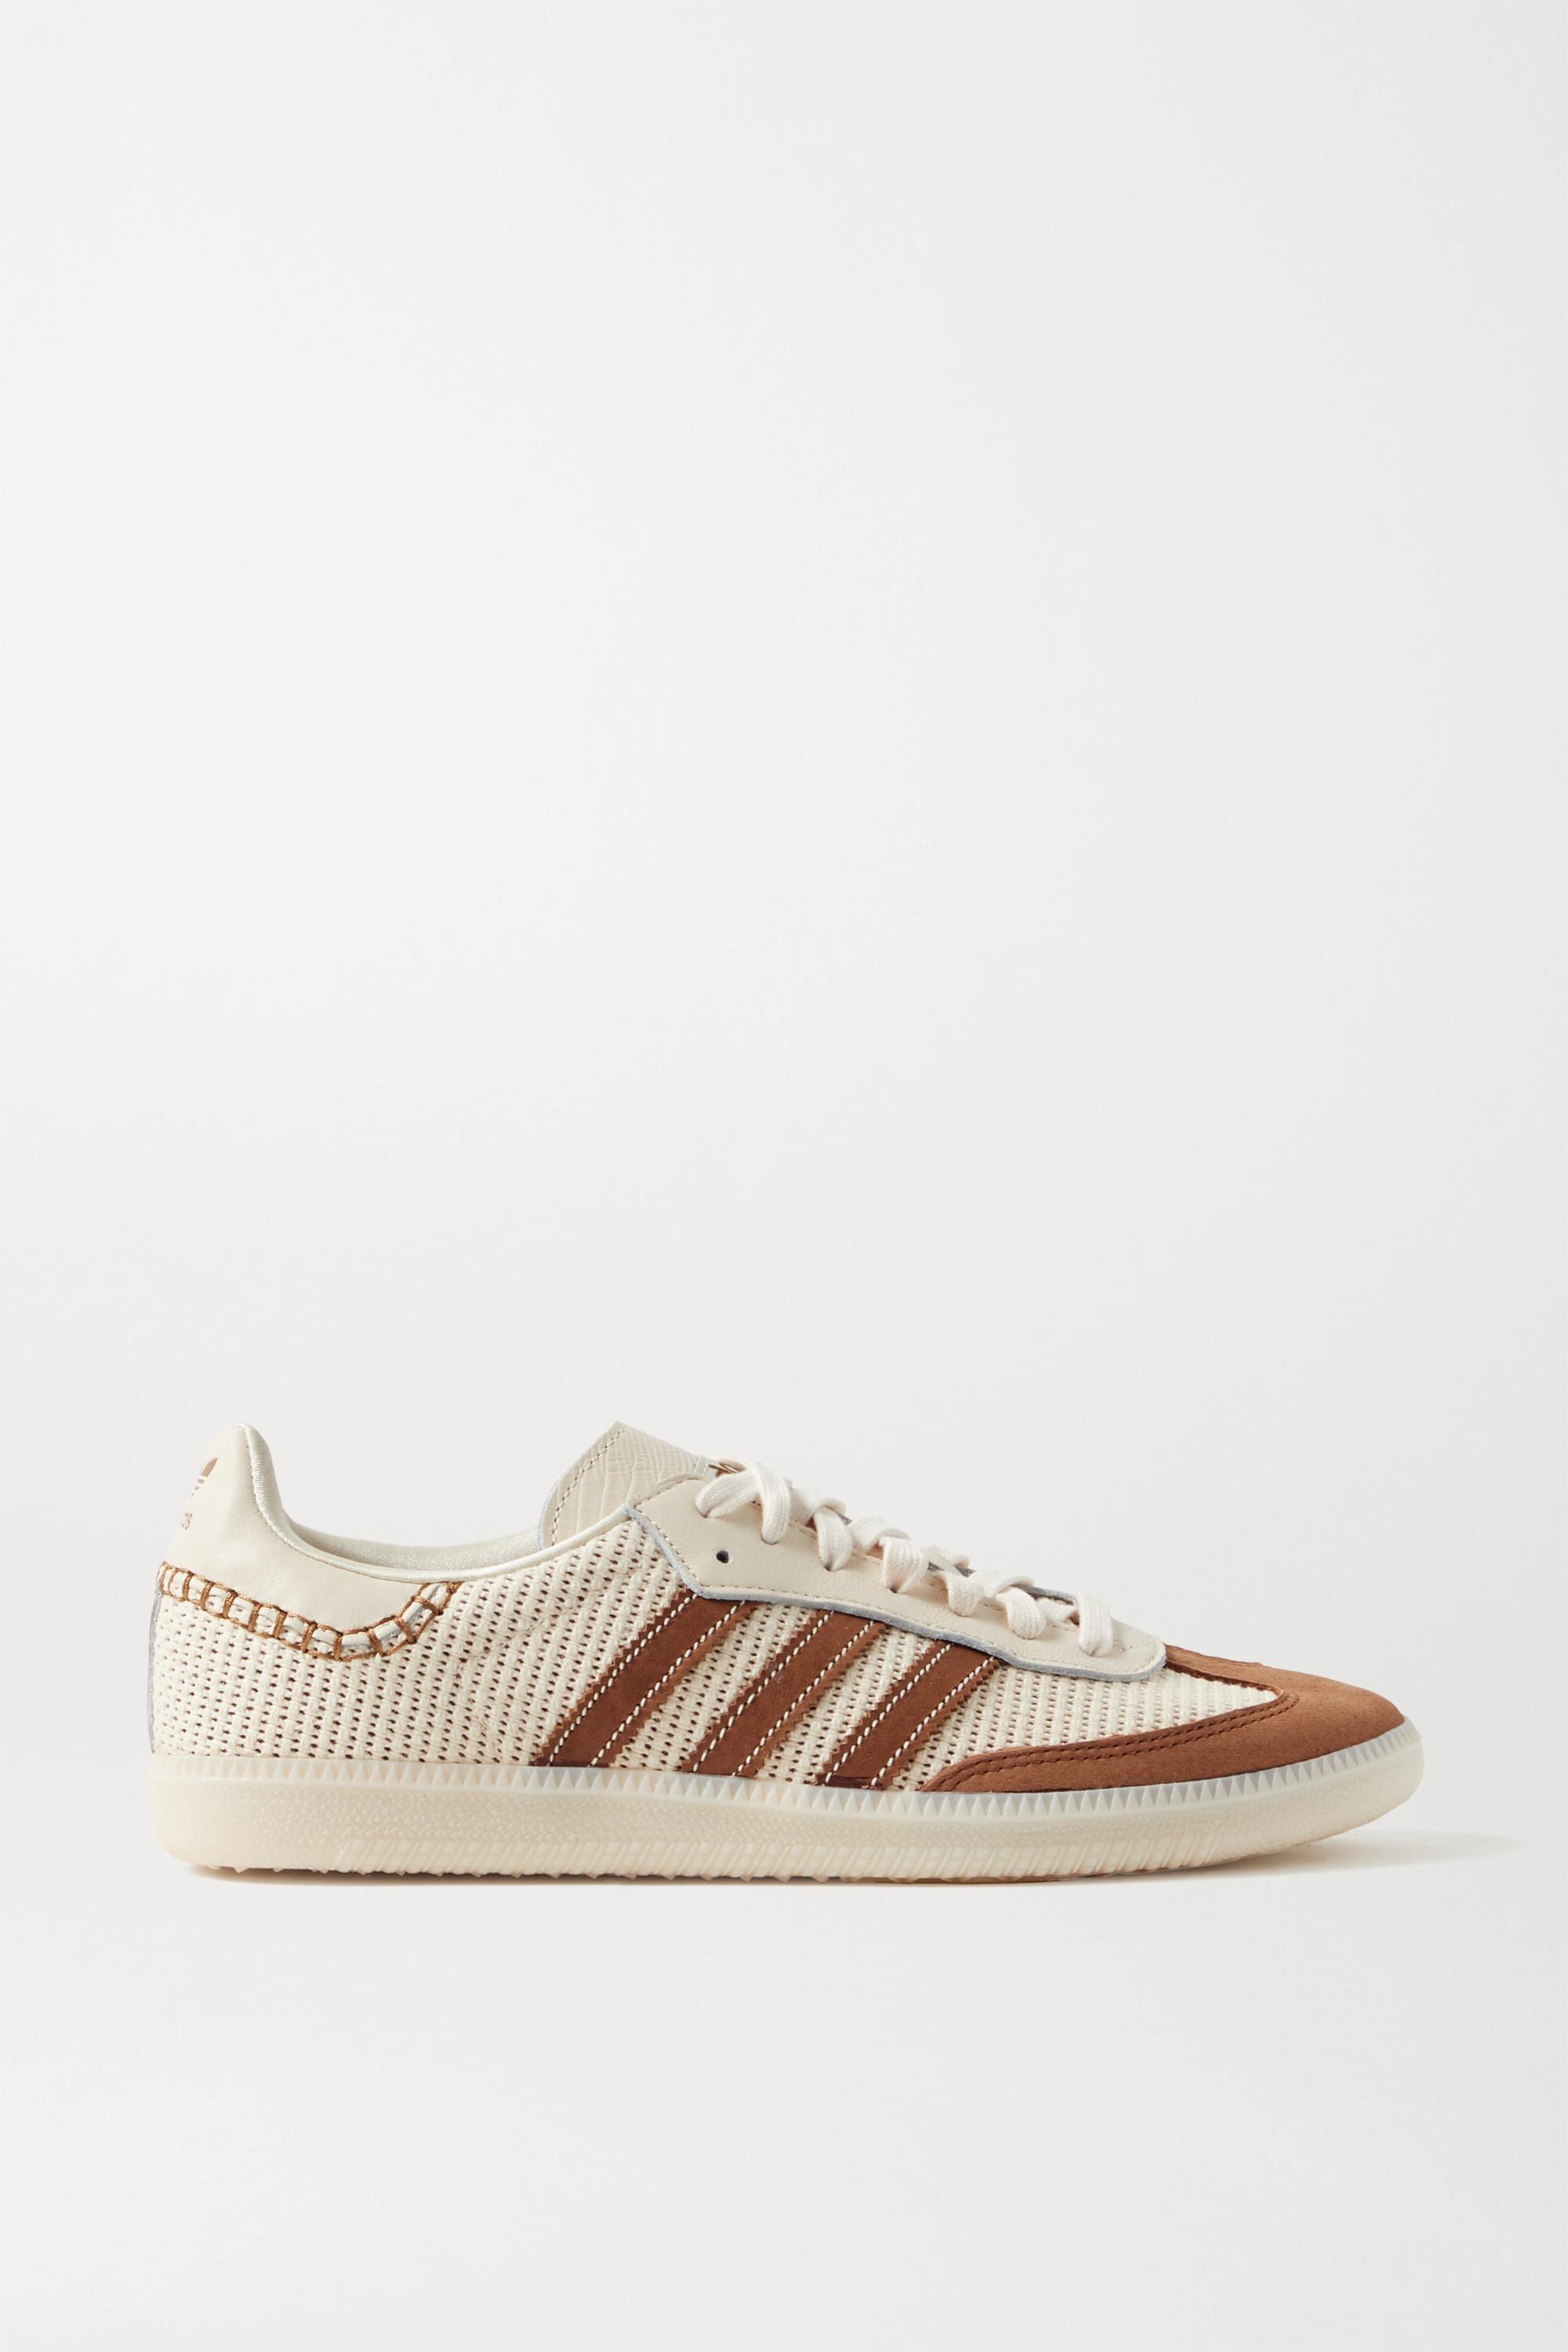 adidas Originals + Wales Bonner Samba Suede, Leather And Mesh Sneakers |  Lyst